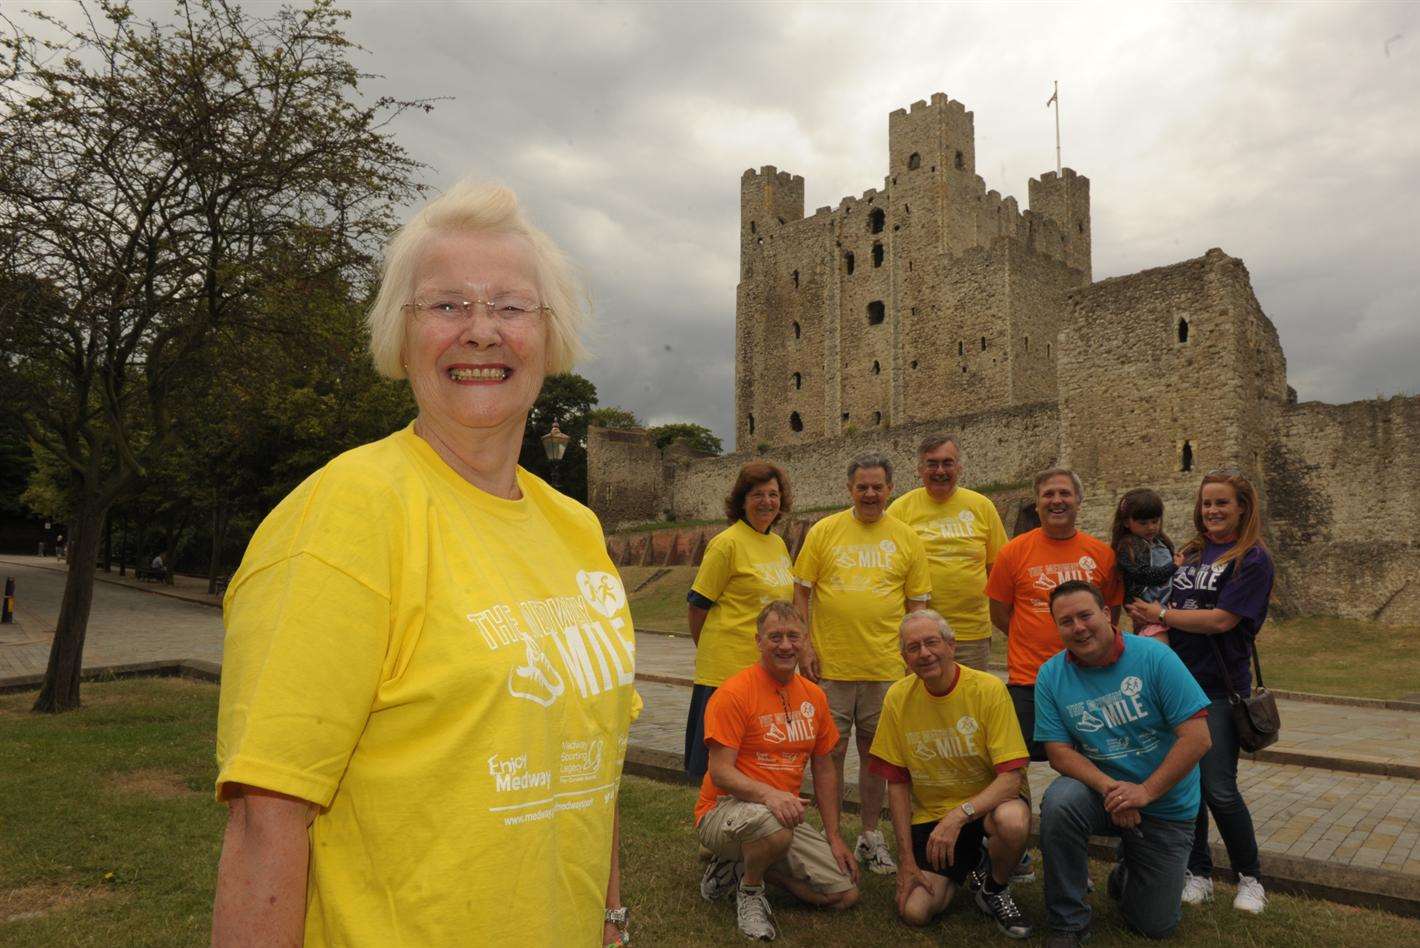 Cllr Sylvia Griffin (on left) and team by Rochester castle